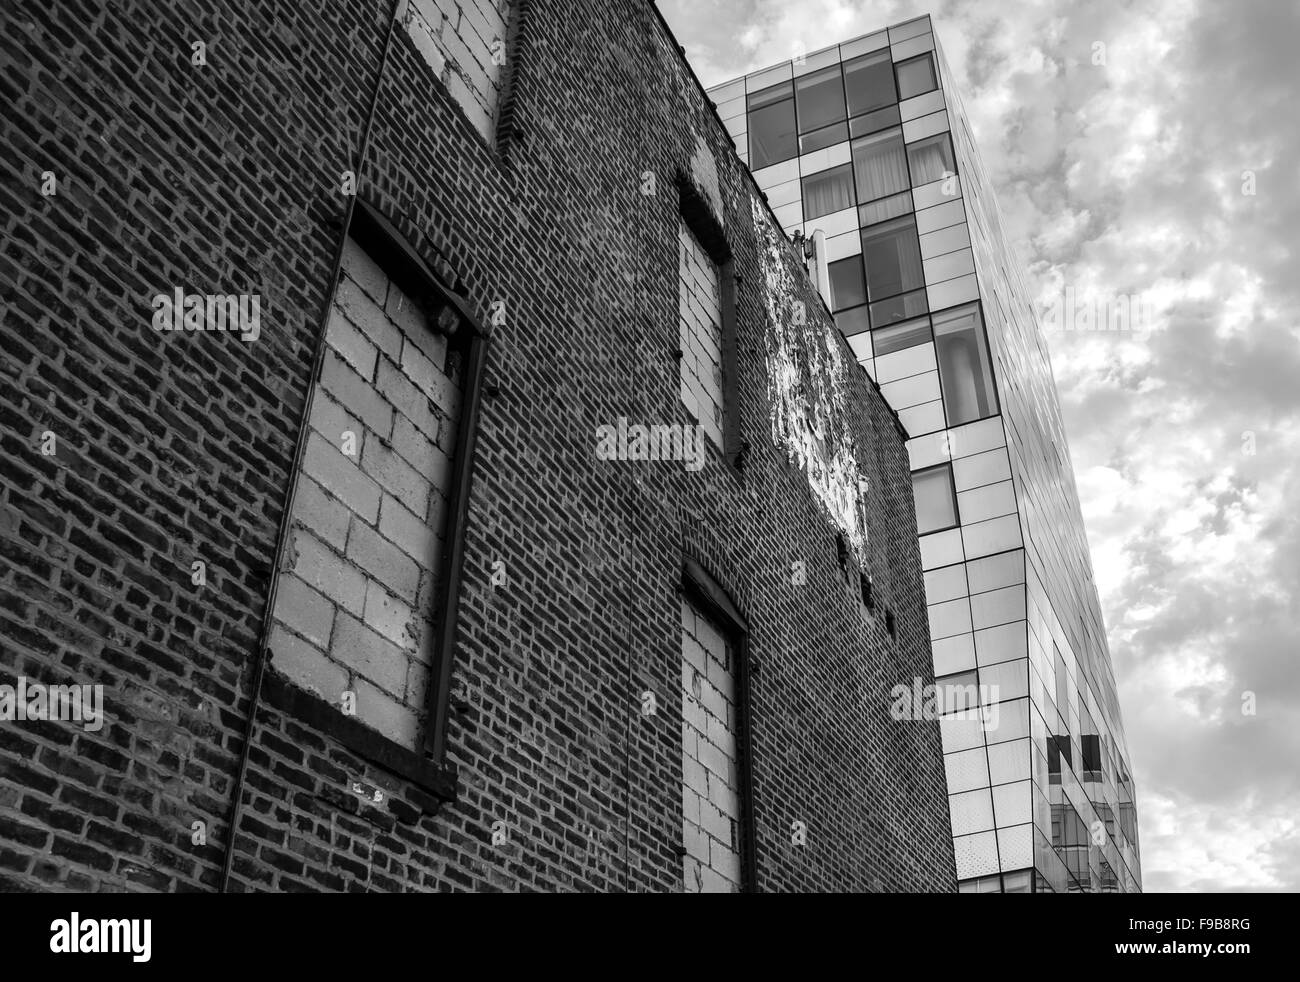 A contrast of an old brick building with a modern glass tower in monochrome. Shot in NYC. Stock Photo